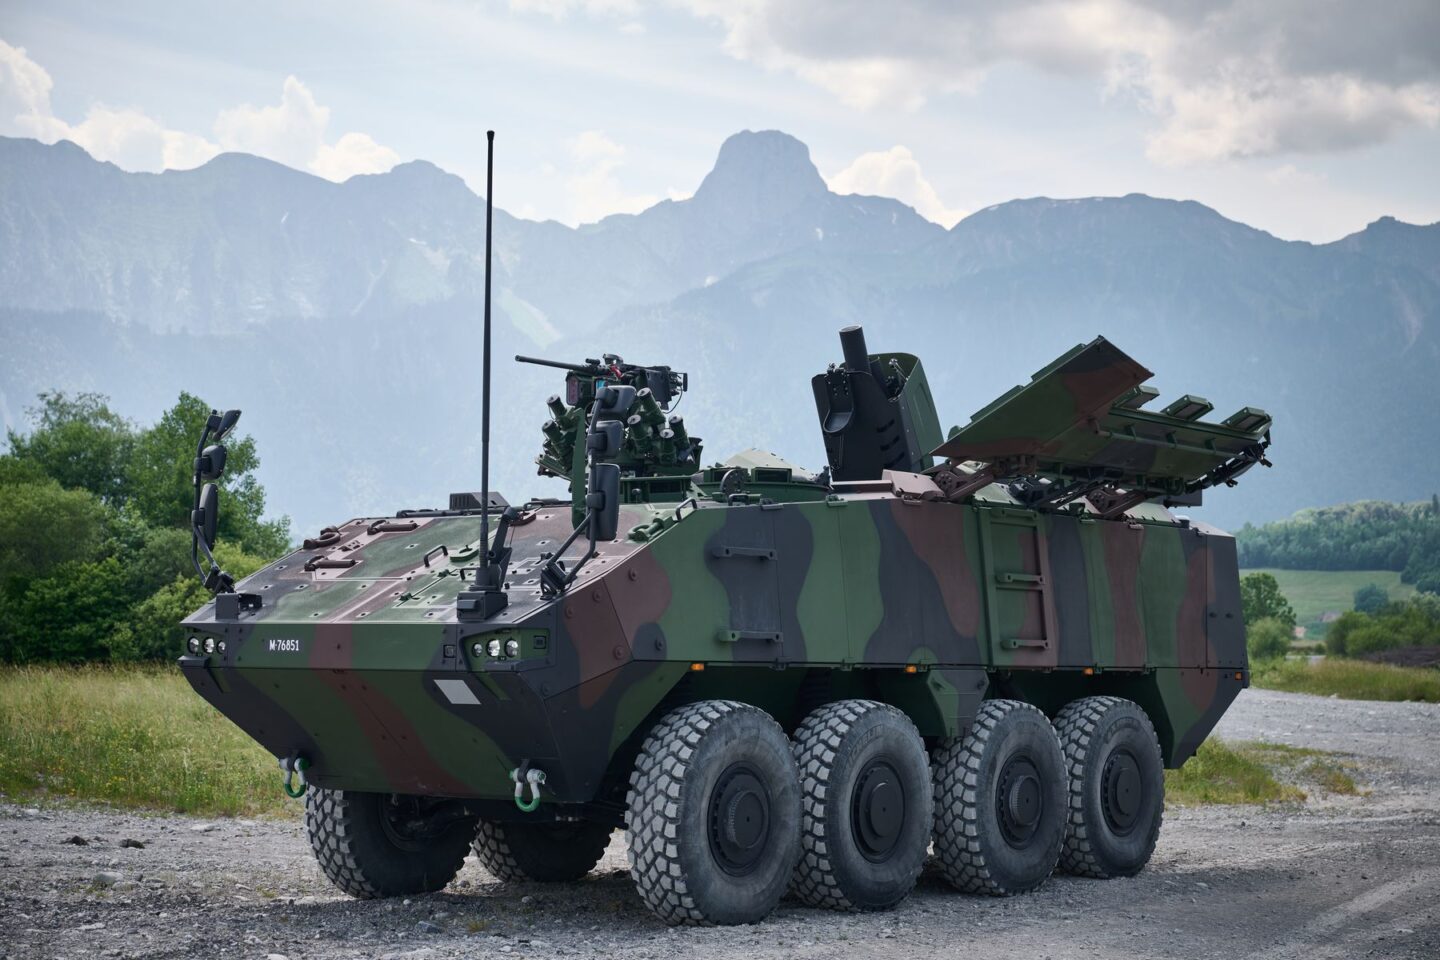 Swiss Federal Armaments Office Clears Mörser 16 120mm Mortar System for Production